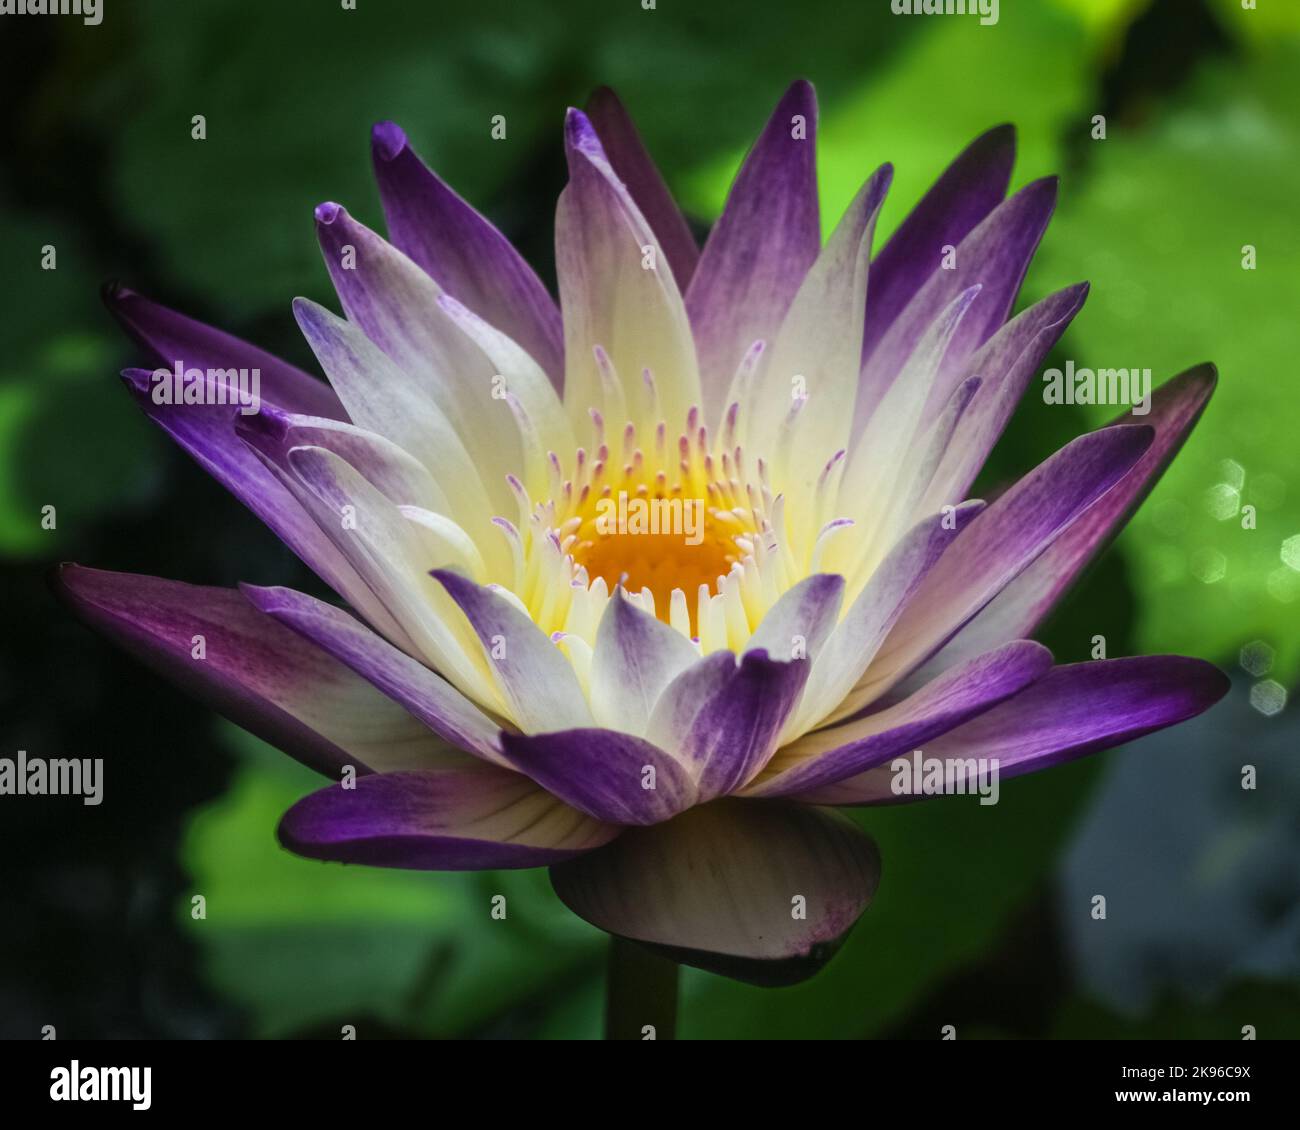 Closeup view of bright purple and white water lily 'purple joy' flower blooming outdoors on dark background Stock Photo